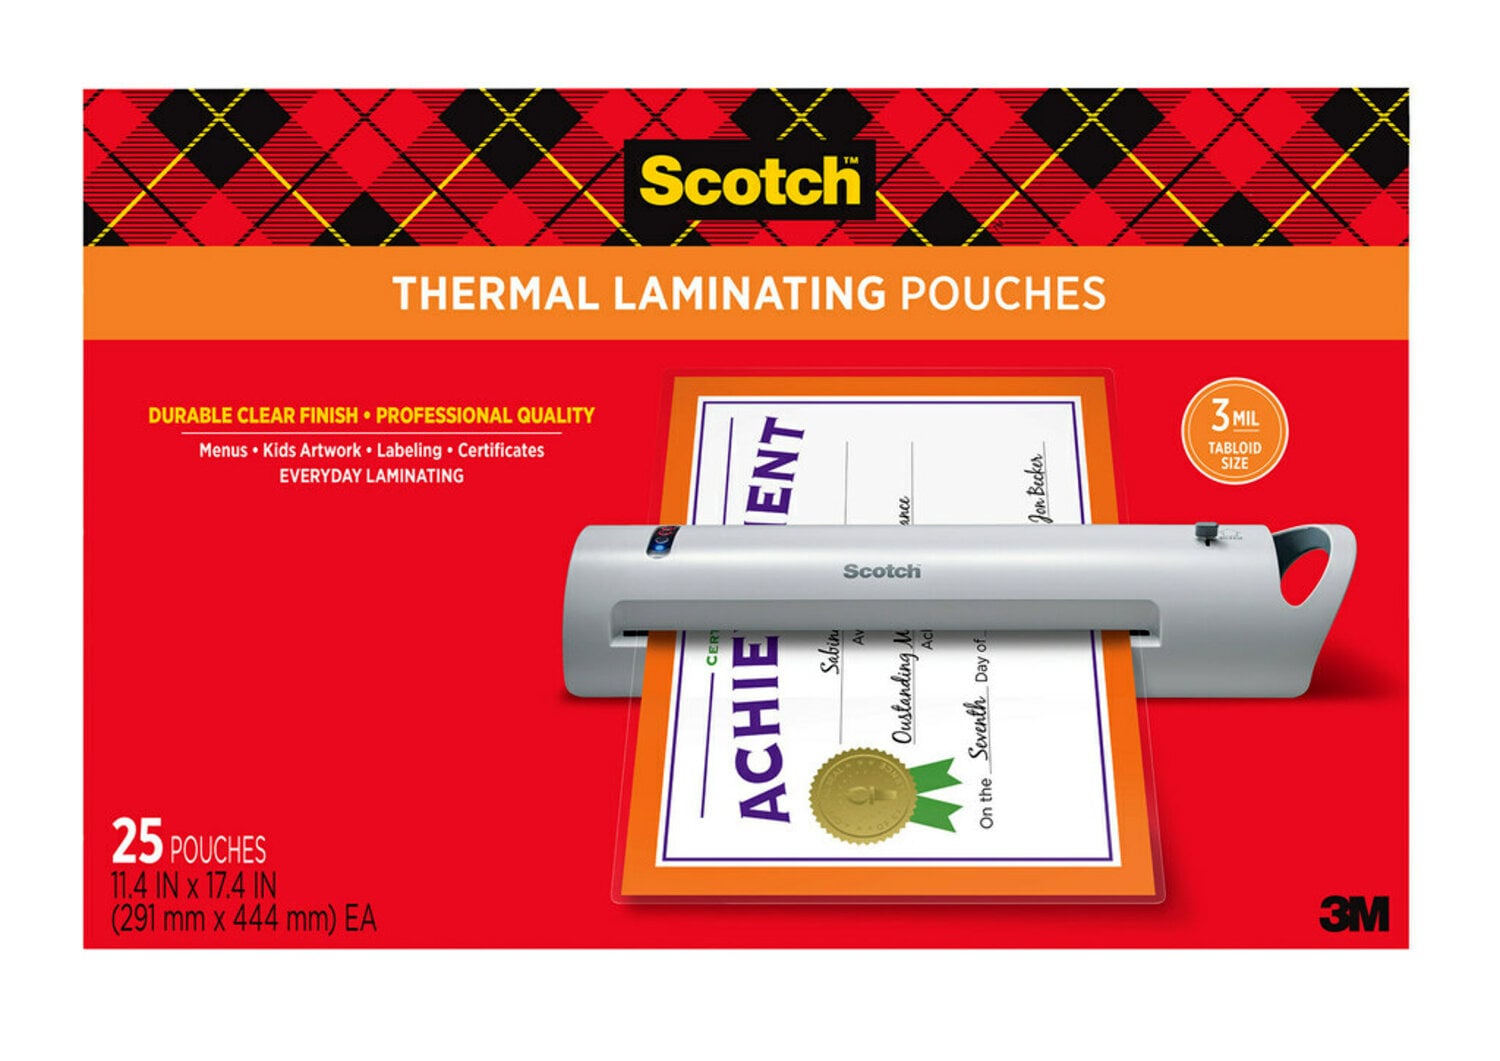 7100265182 - Scotch Laminating Pouches TP3856-25, 11.45 in x 17.48 in (290 mm x 443 mm)